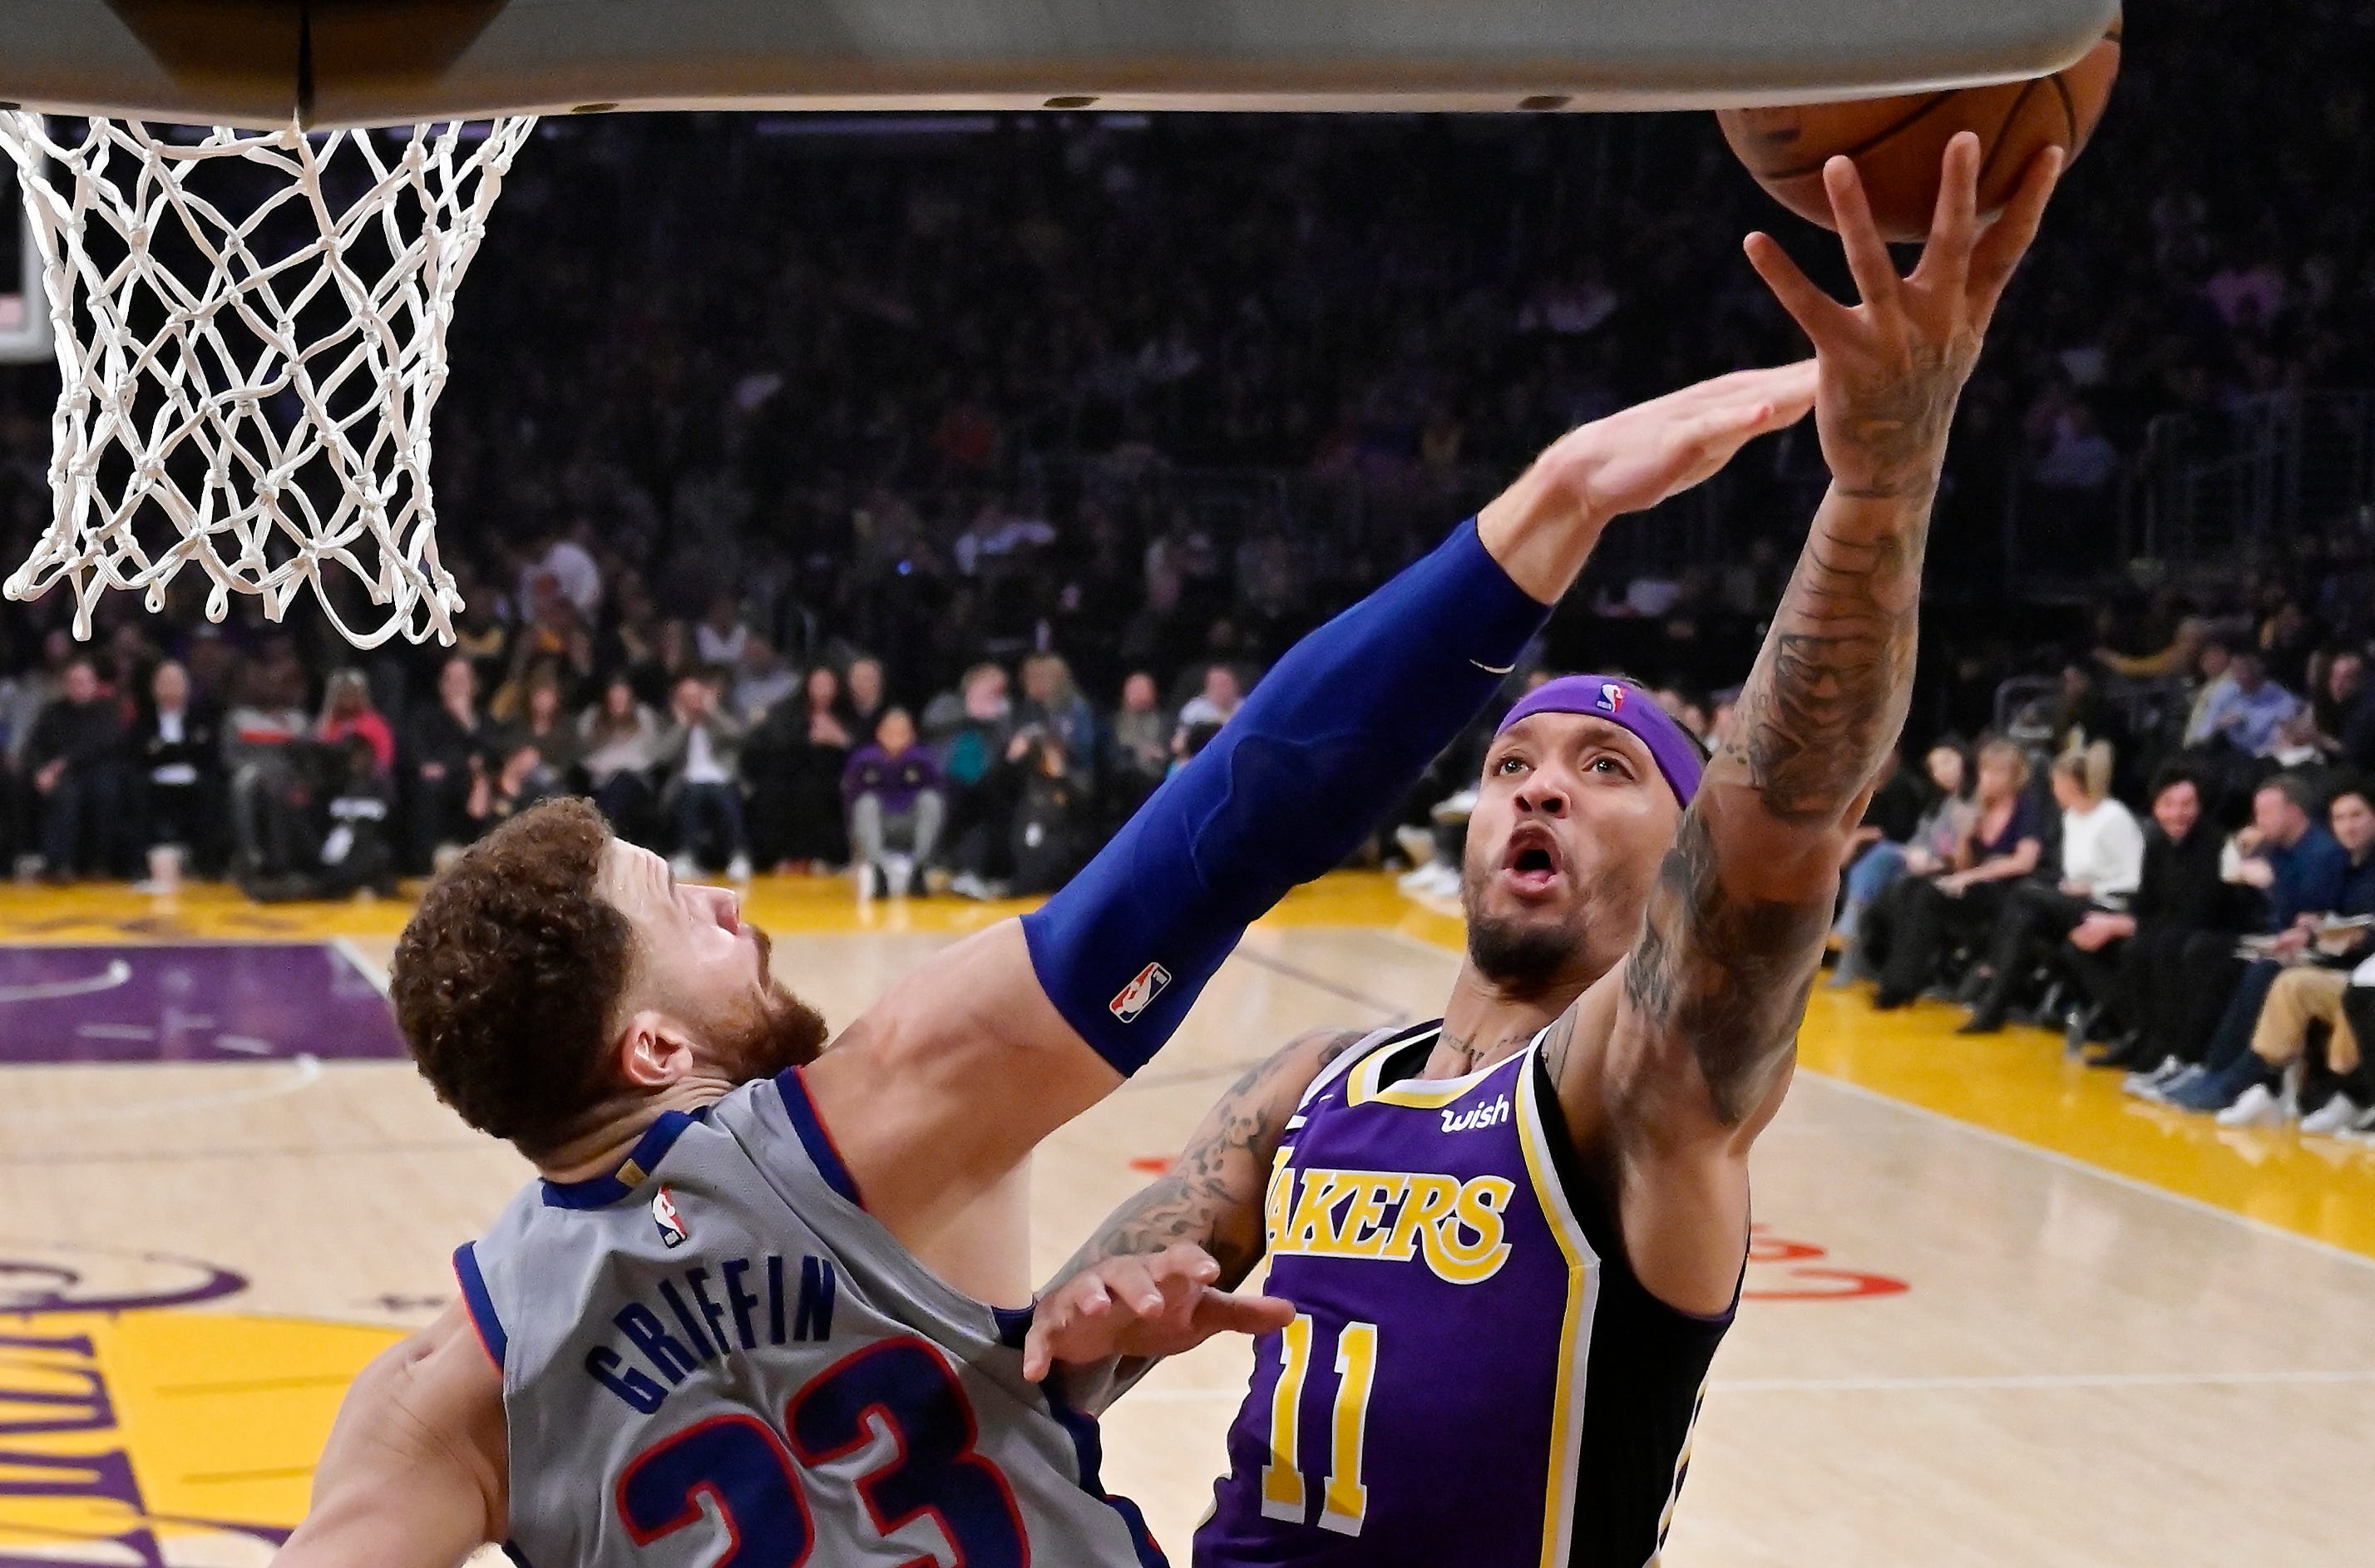 Los Angeles Lakers forward Michael Beasley, right, shoots as Detroit Pistons forward Blake Griffin defends during the first half.